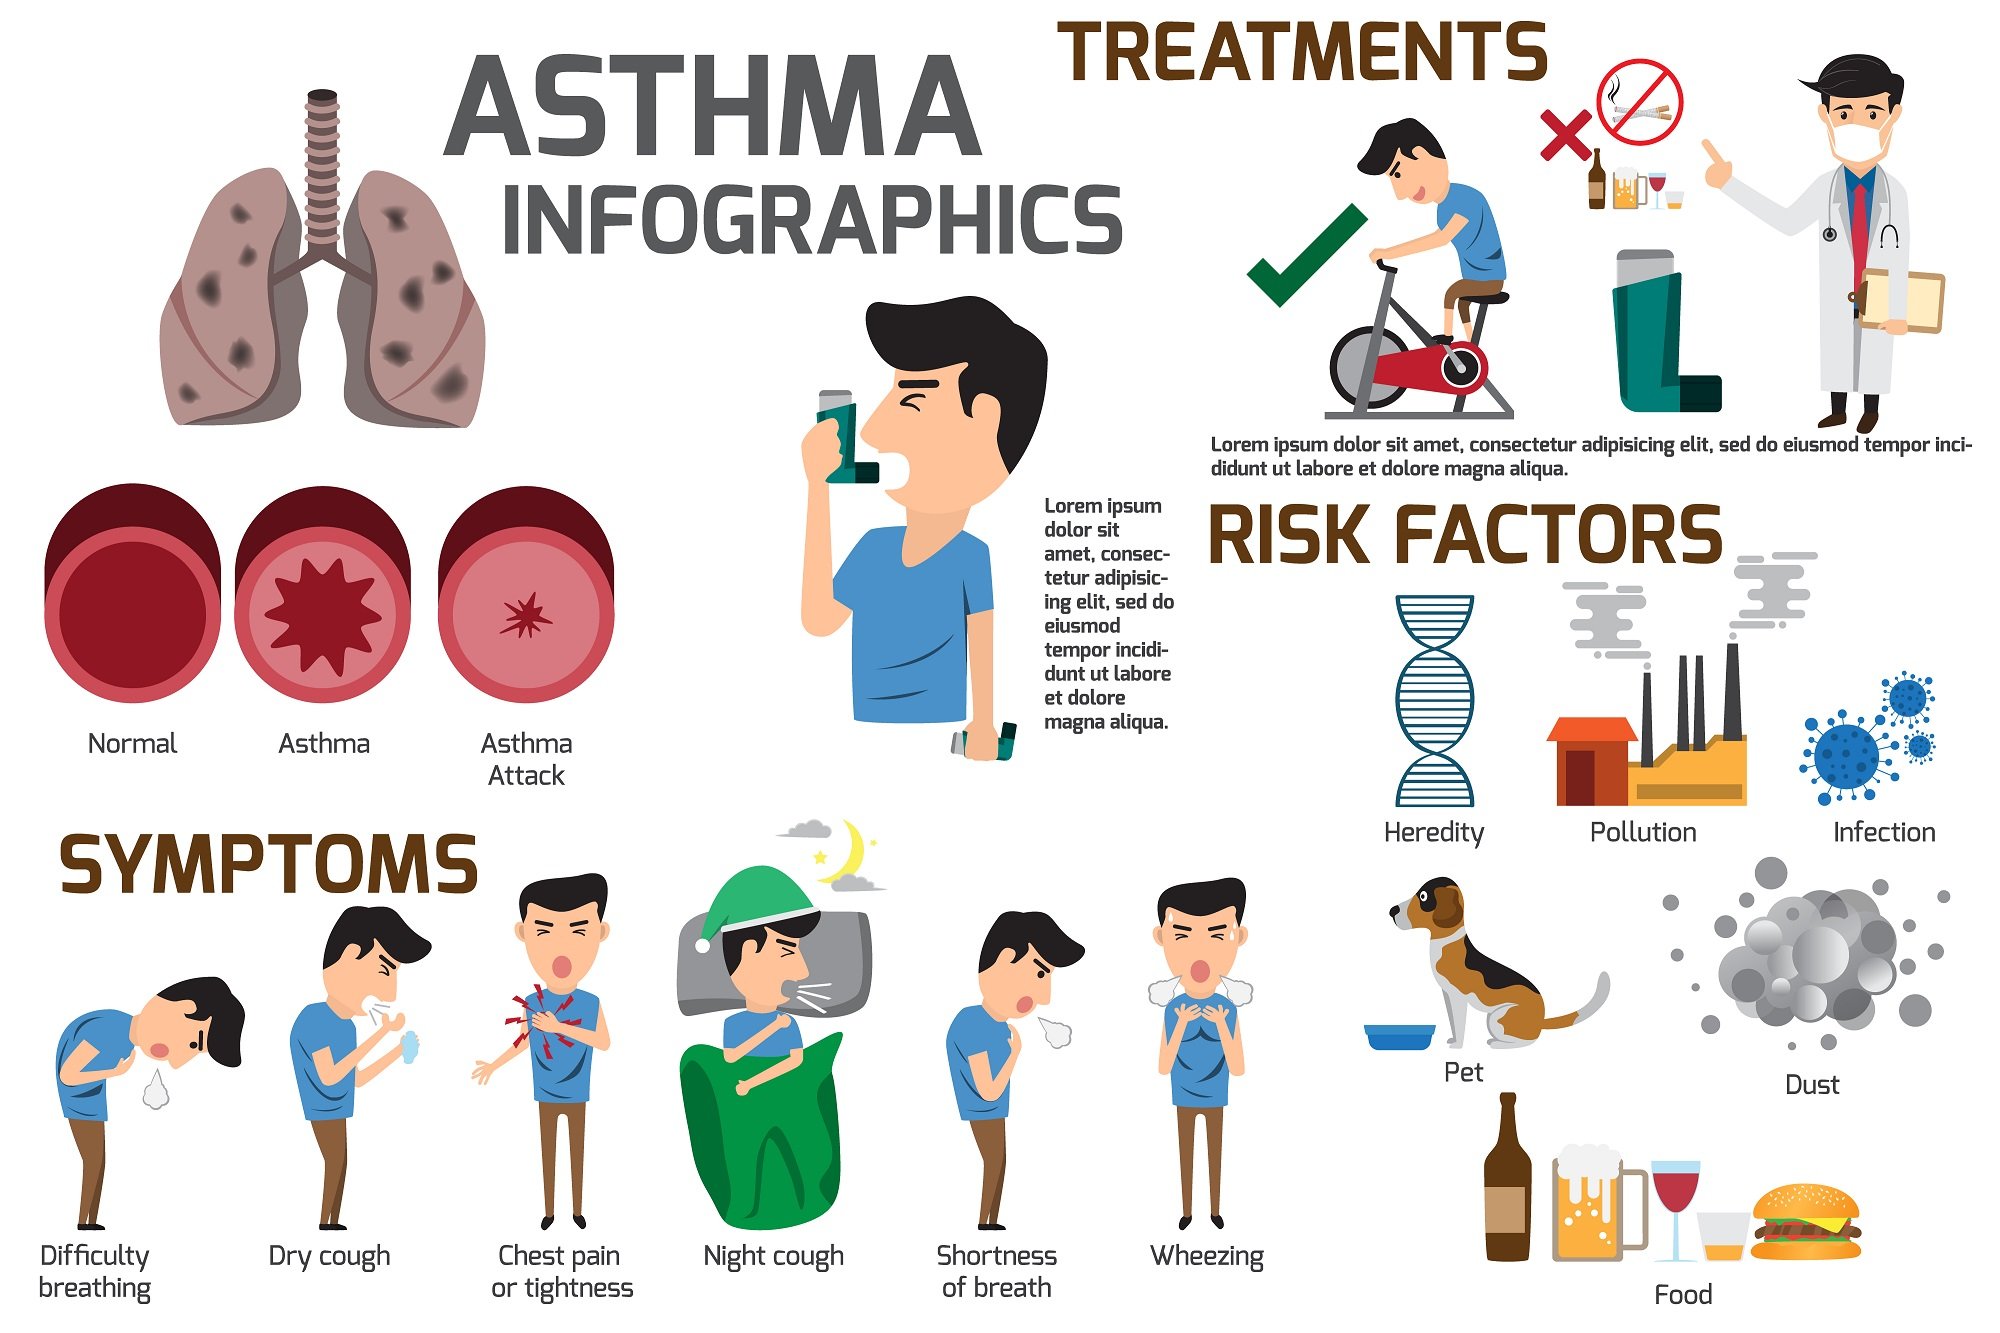 Asthma Treatment in Annapolis, MD